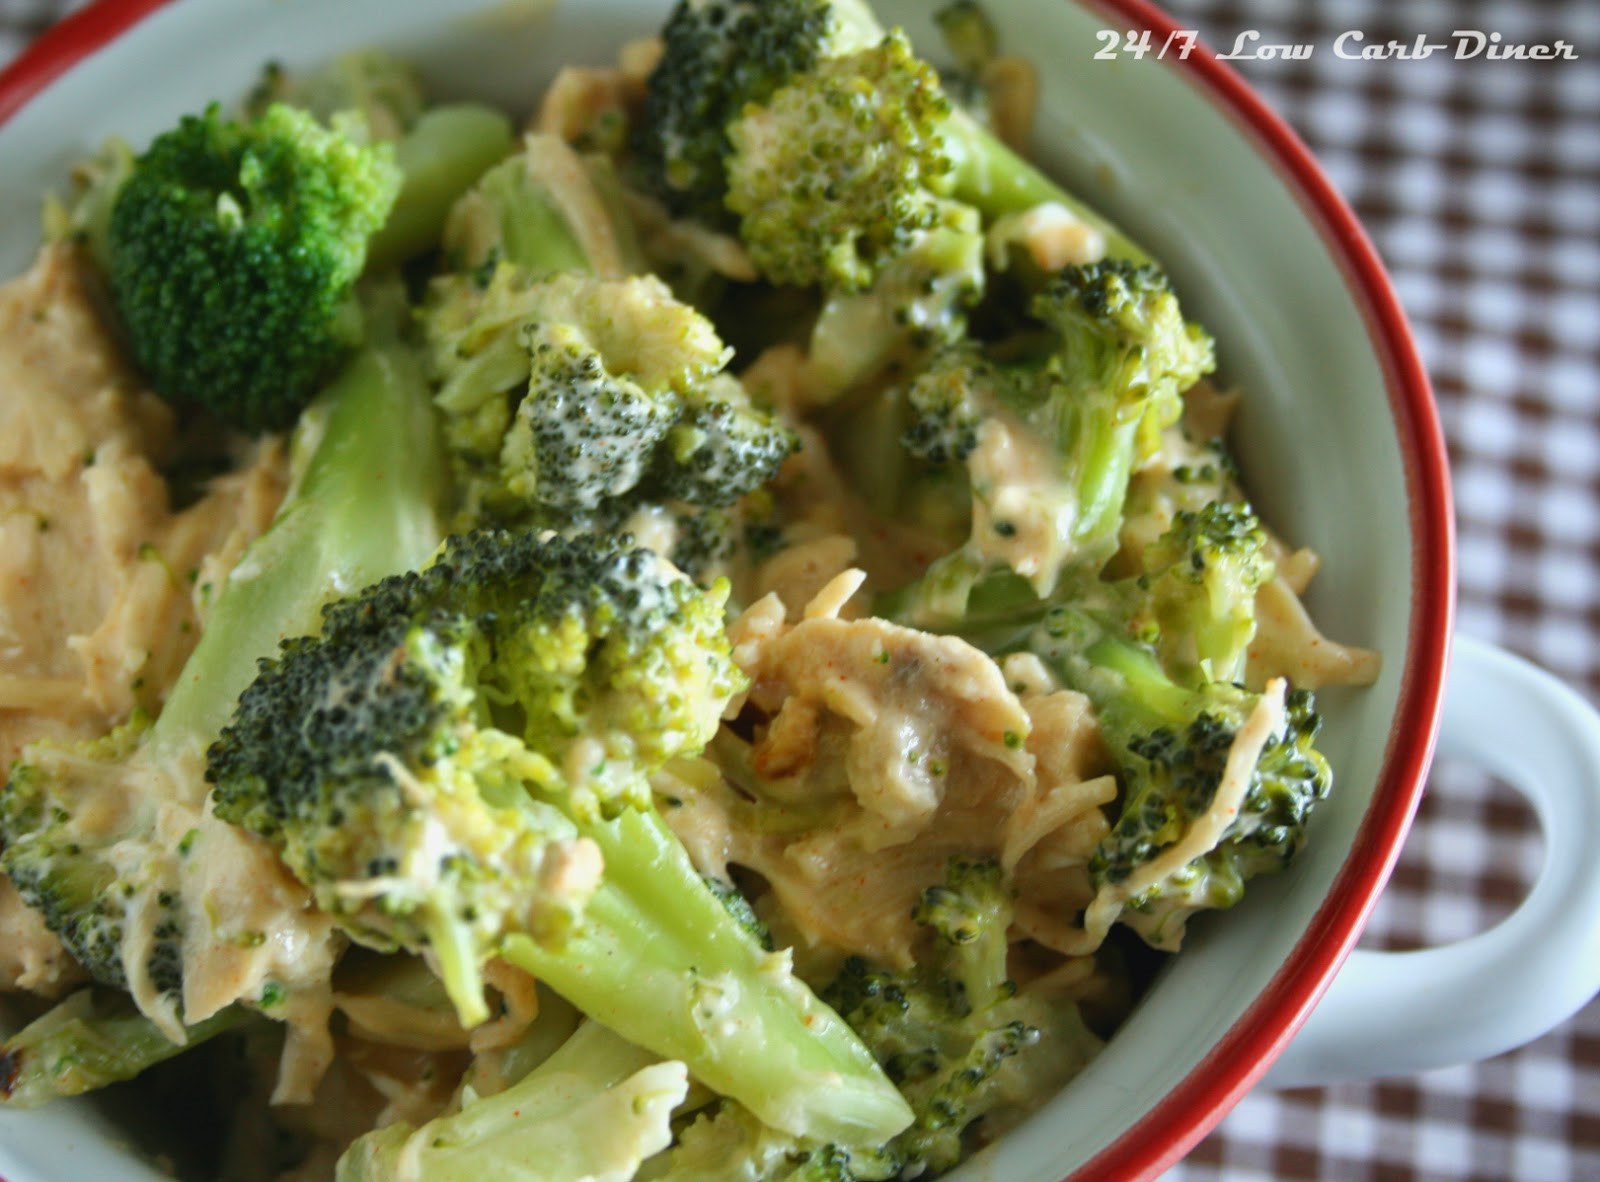 Chicken And Broccoli
 24 7 Low Carb Diner Chicken and Broccoli Casserole for 2